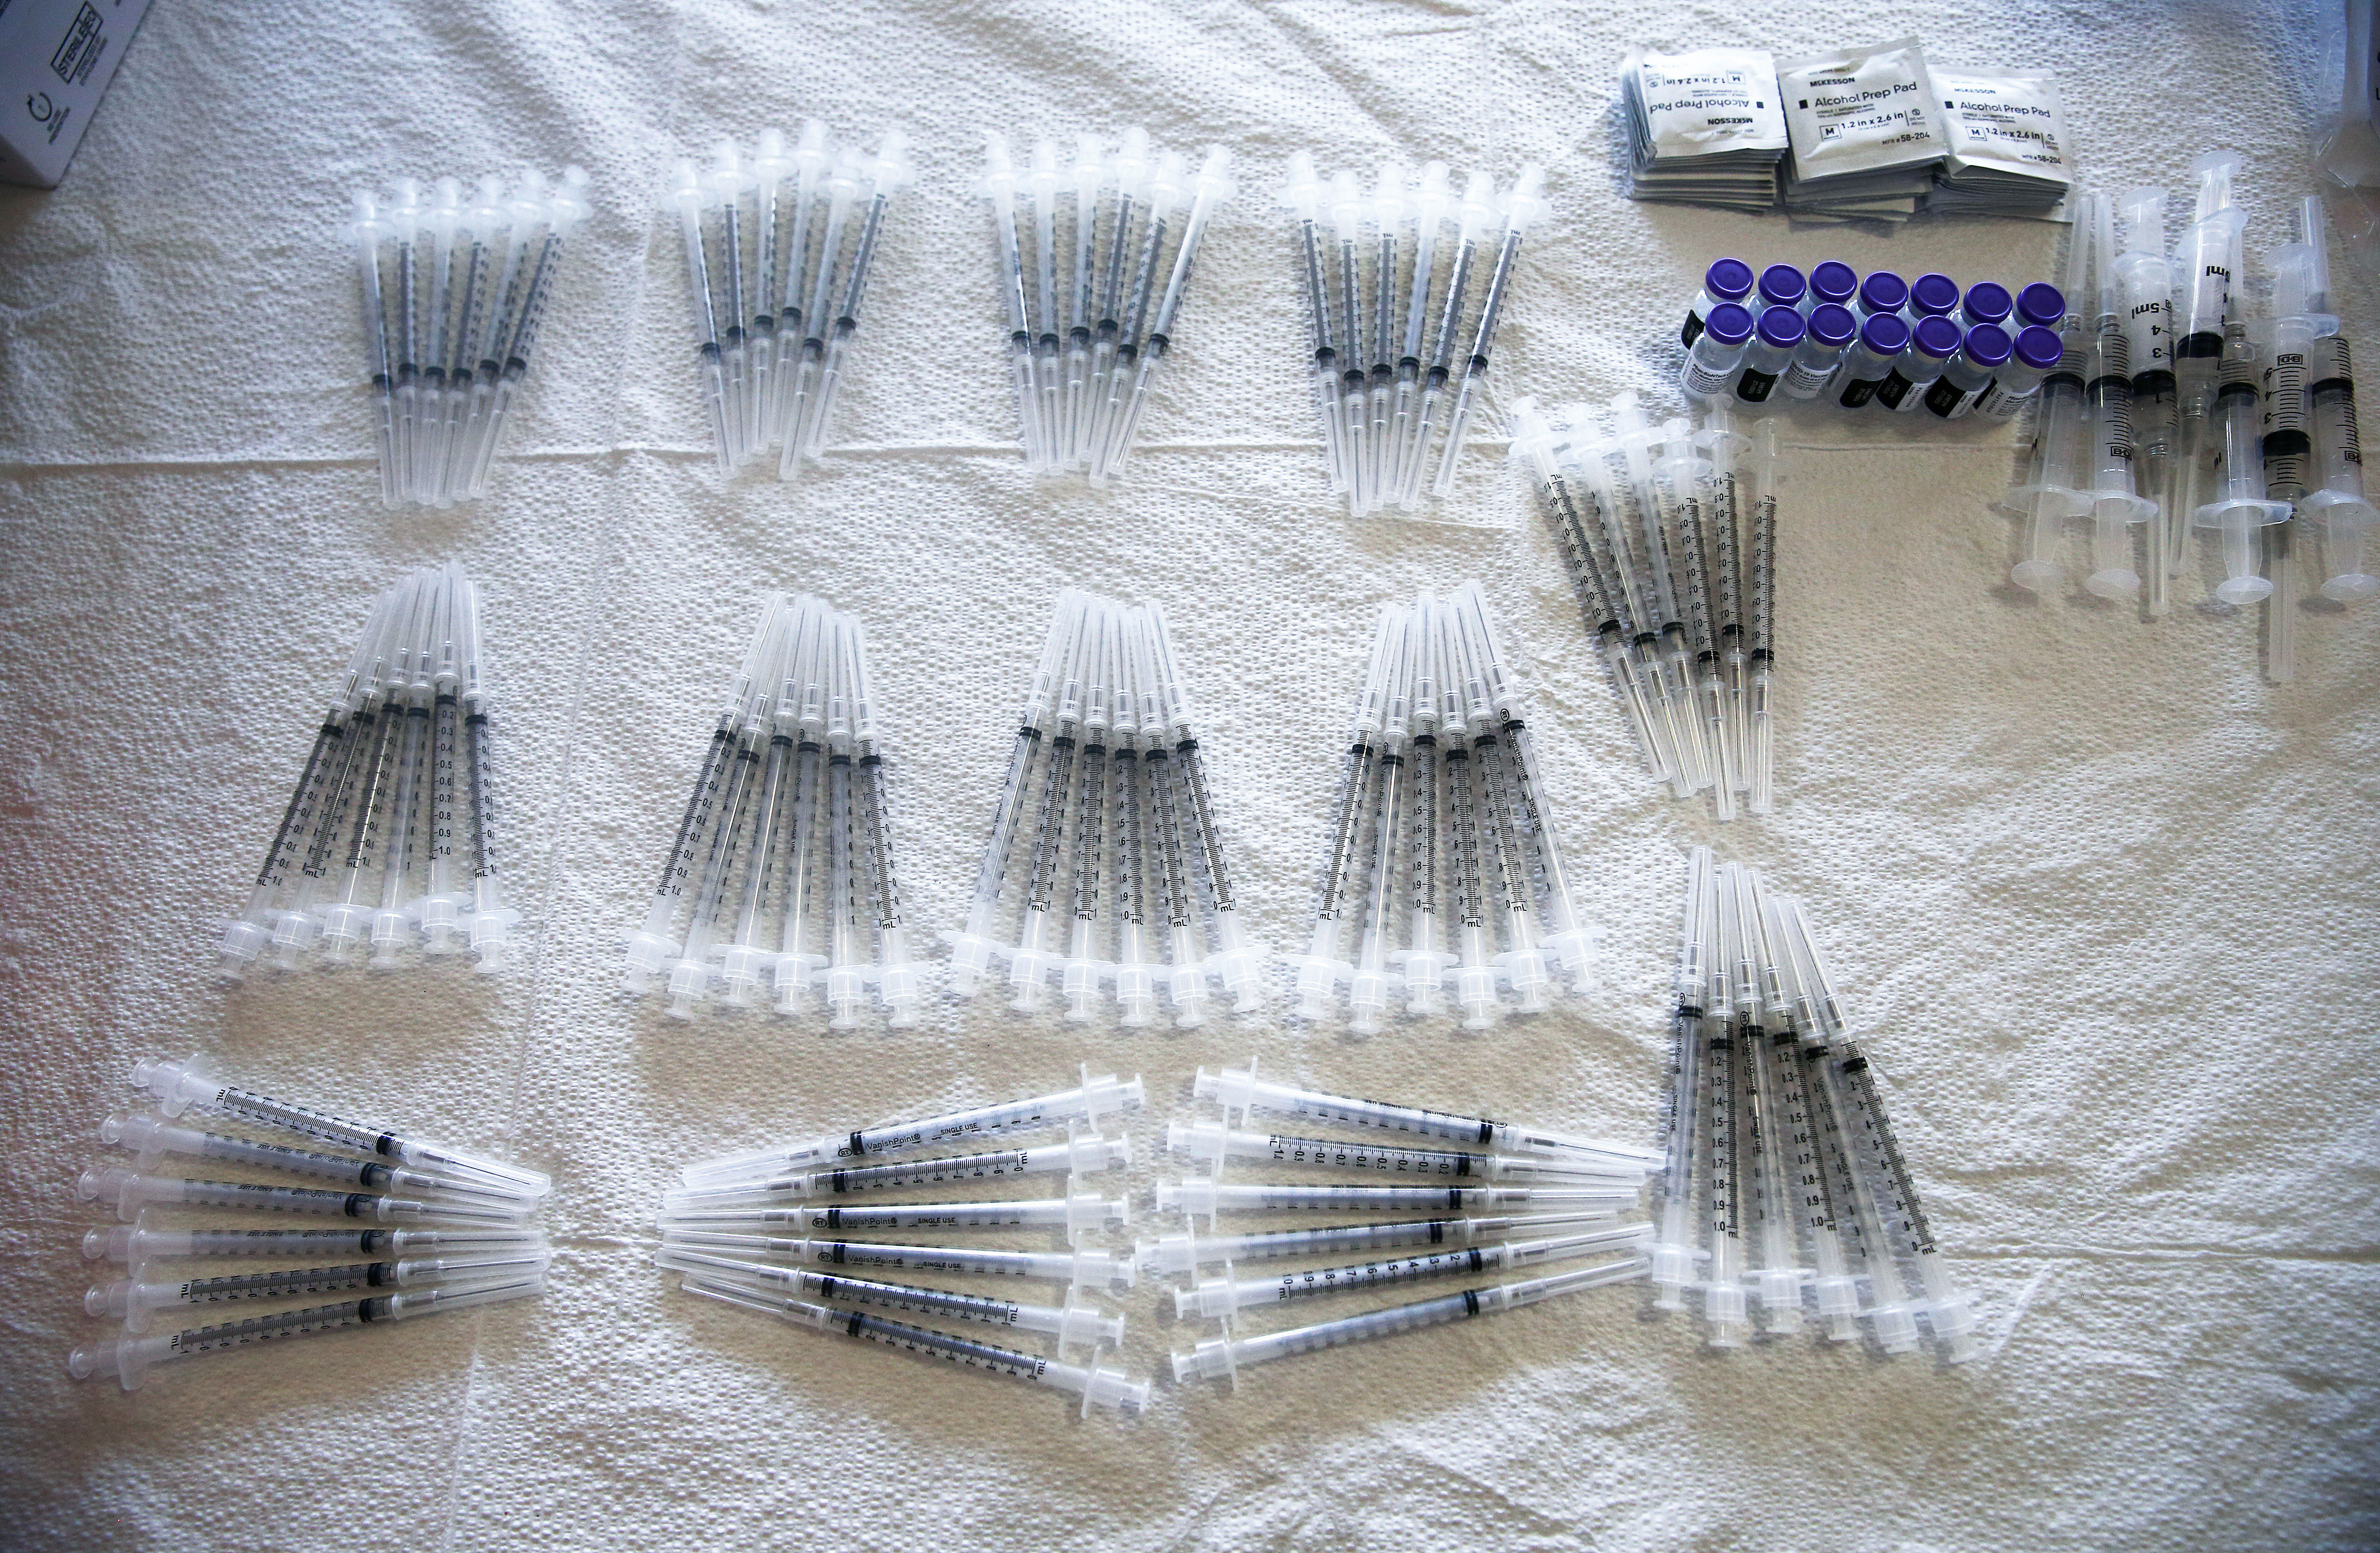 Syringes are prepared for doses of the Pfizer Covid-19 vaccine on April 9 in Los Angeles.